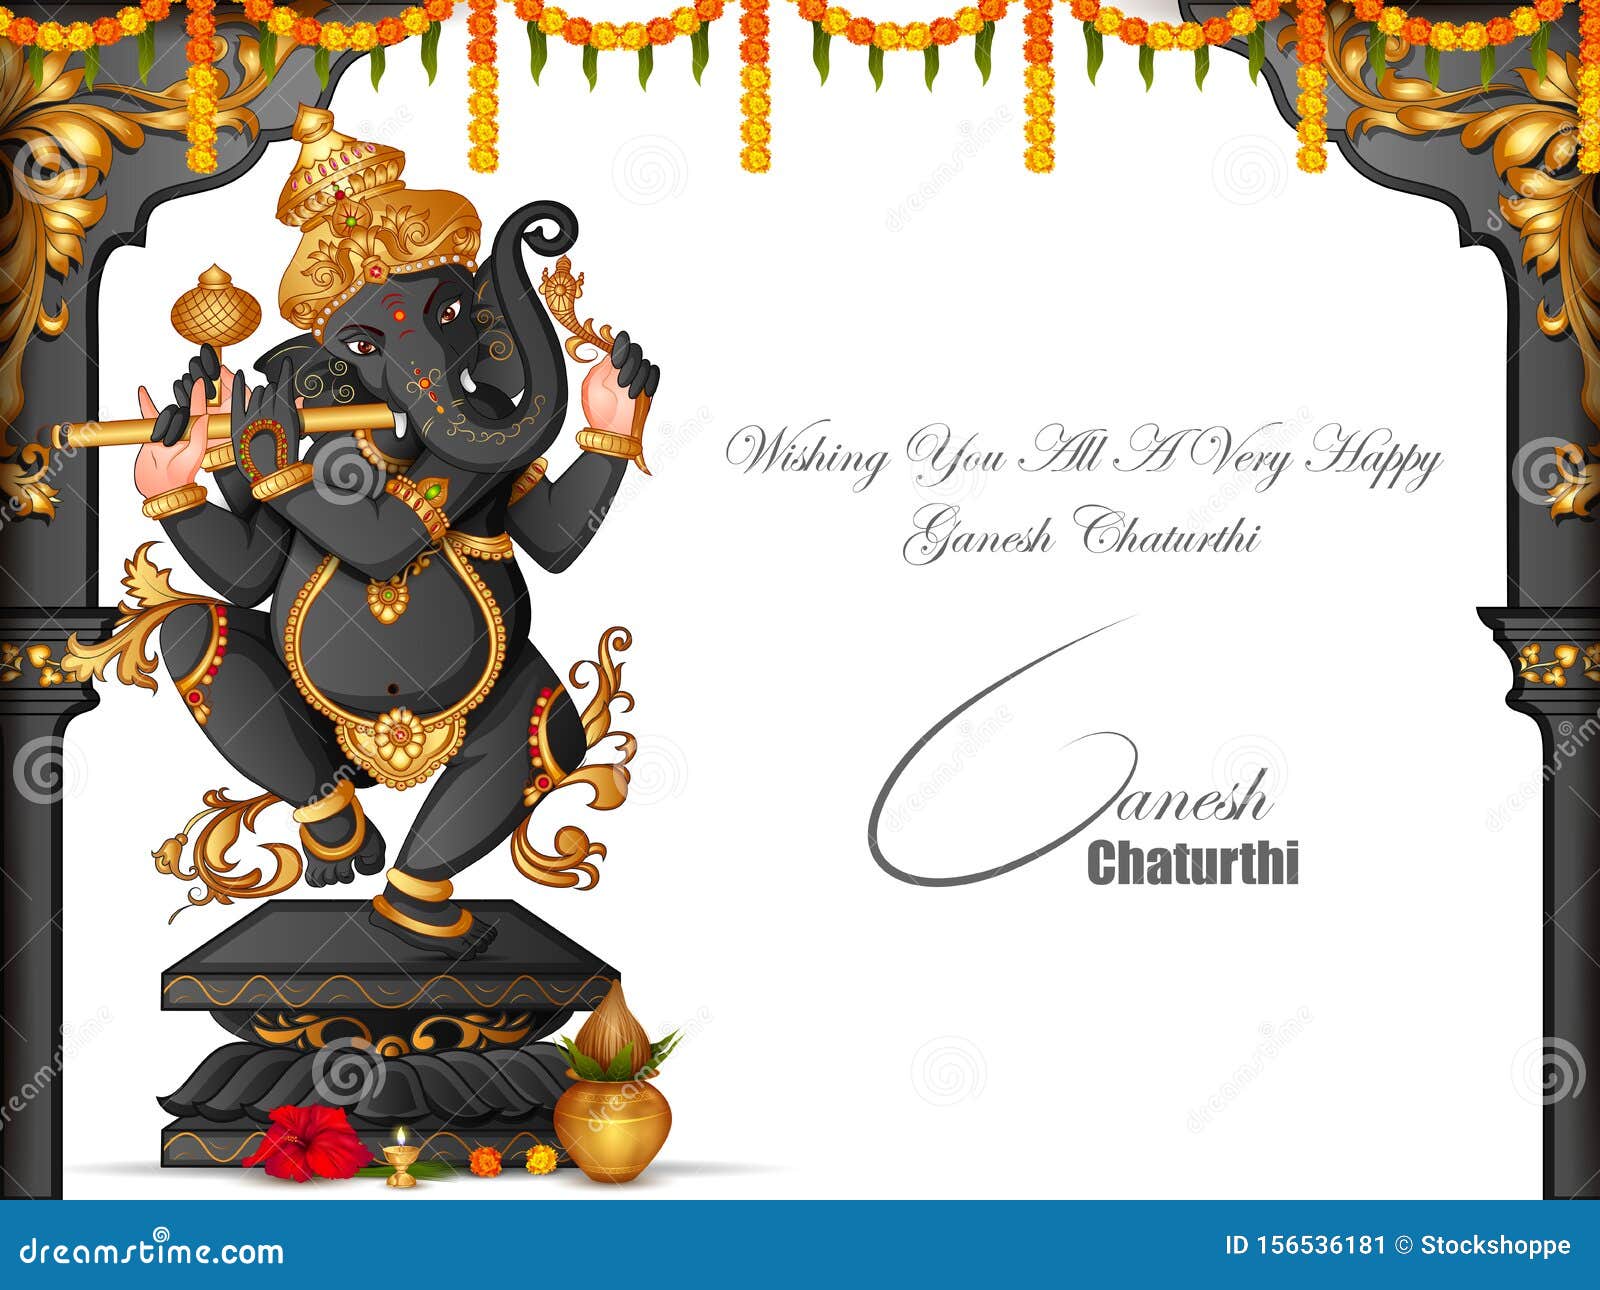 Lord Ganapati for Happy Ganesh Chaturthi Festival Religious Banner  Background Stock Vector - Illustration of indian, happy: 156536181